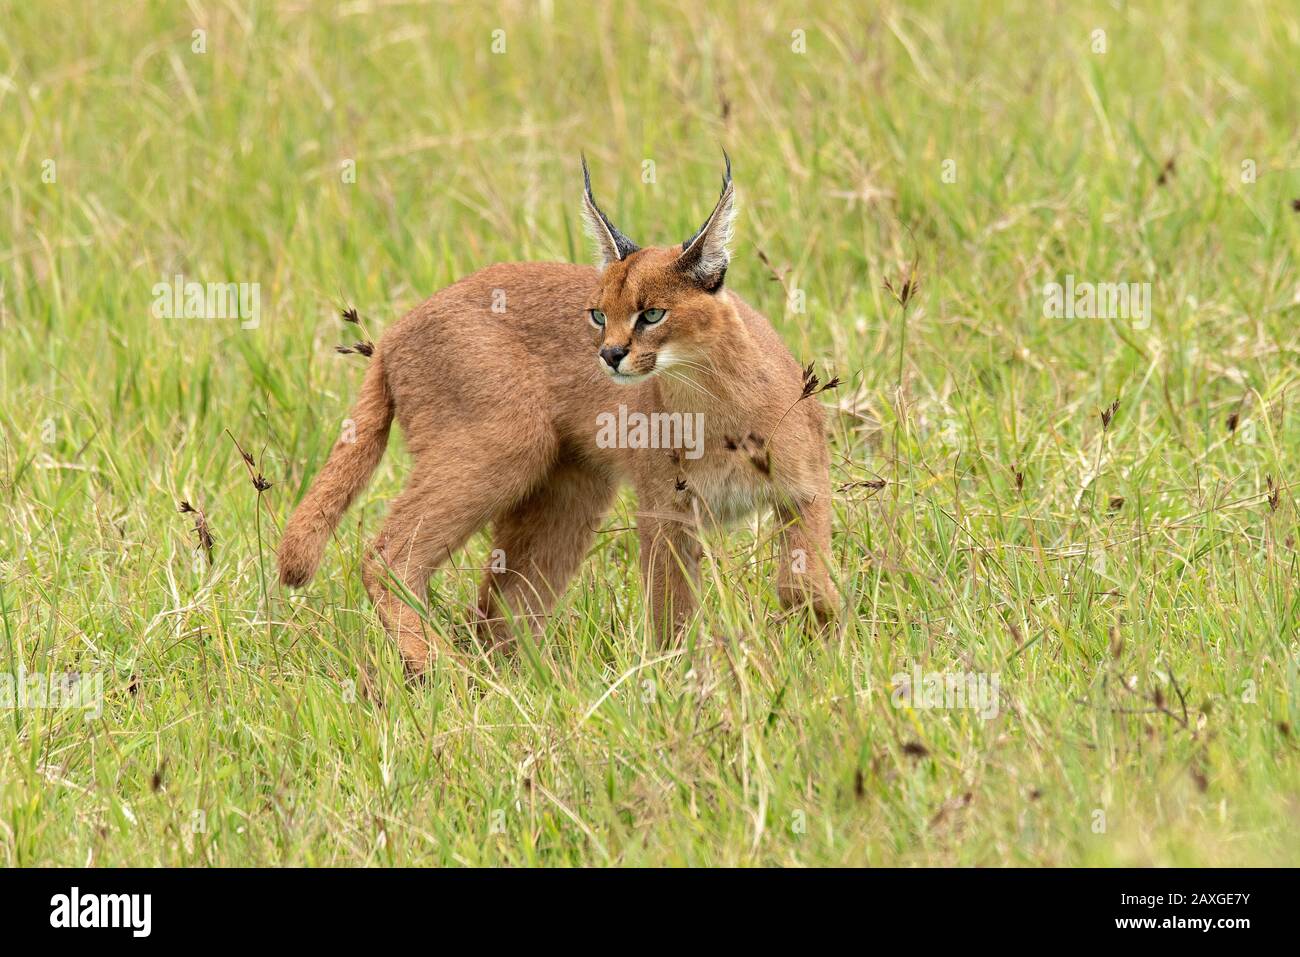 The shy and often elusive Caracal cat, spotted in the EUNSECO listed Ngorongoro Crater Conservation Area. 3 of 4 images in the series. Stock Photo